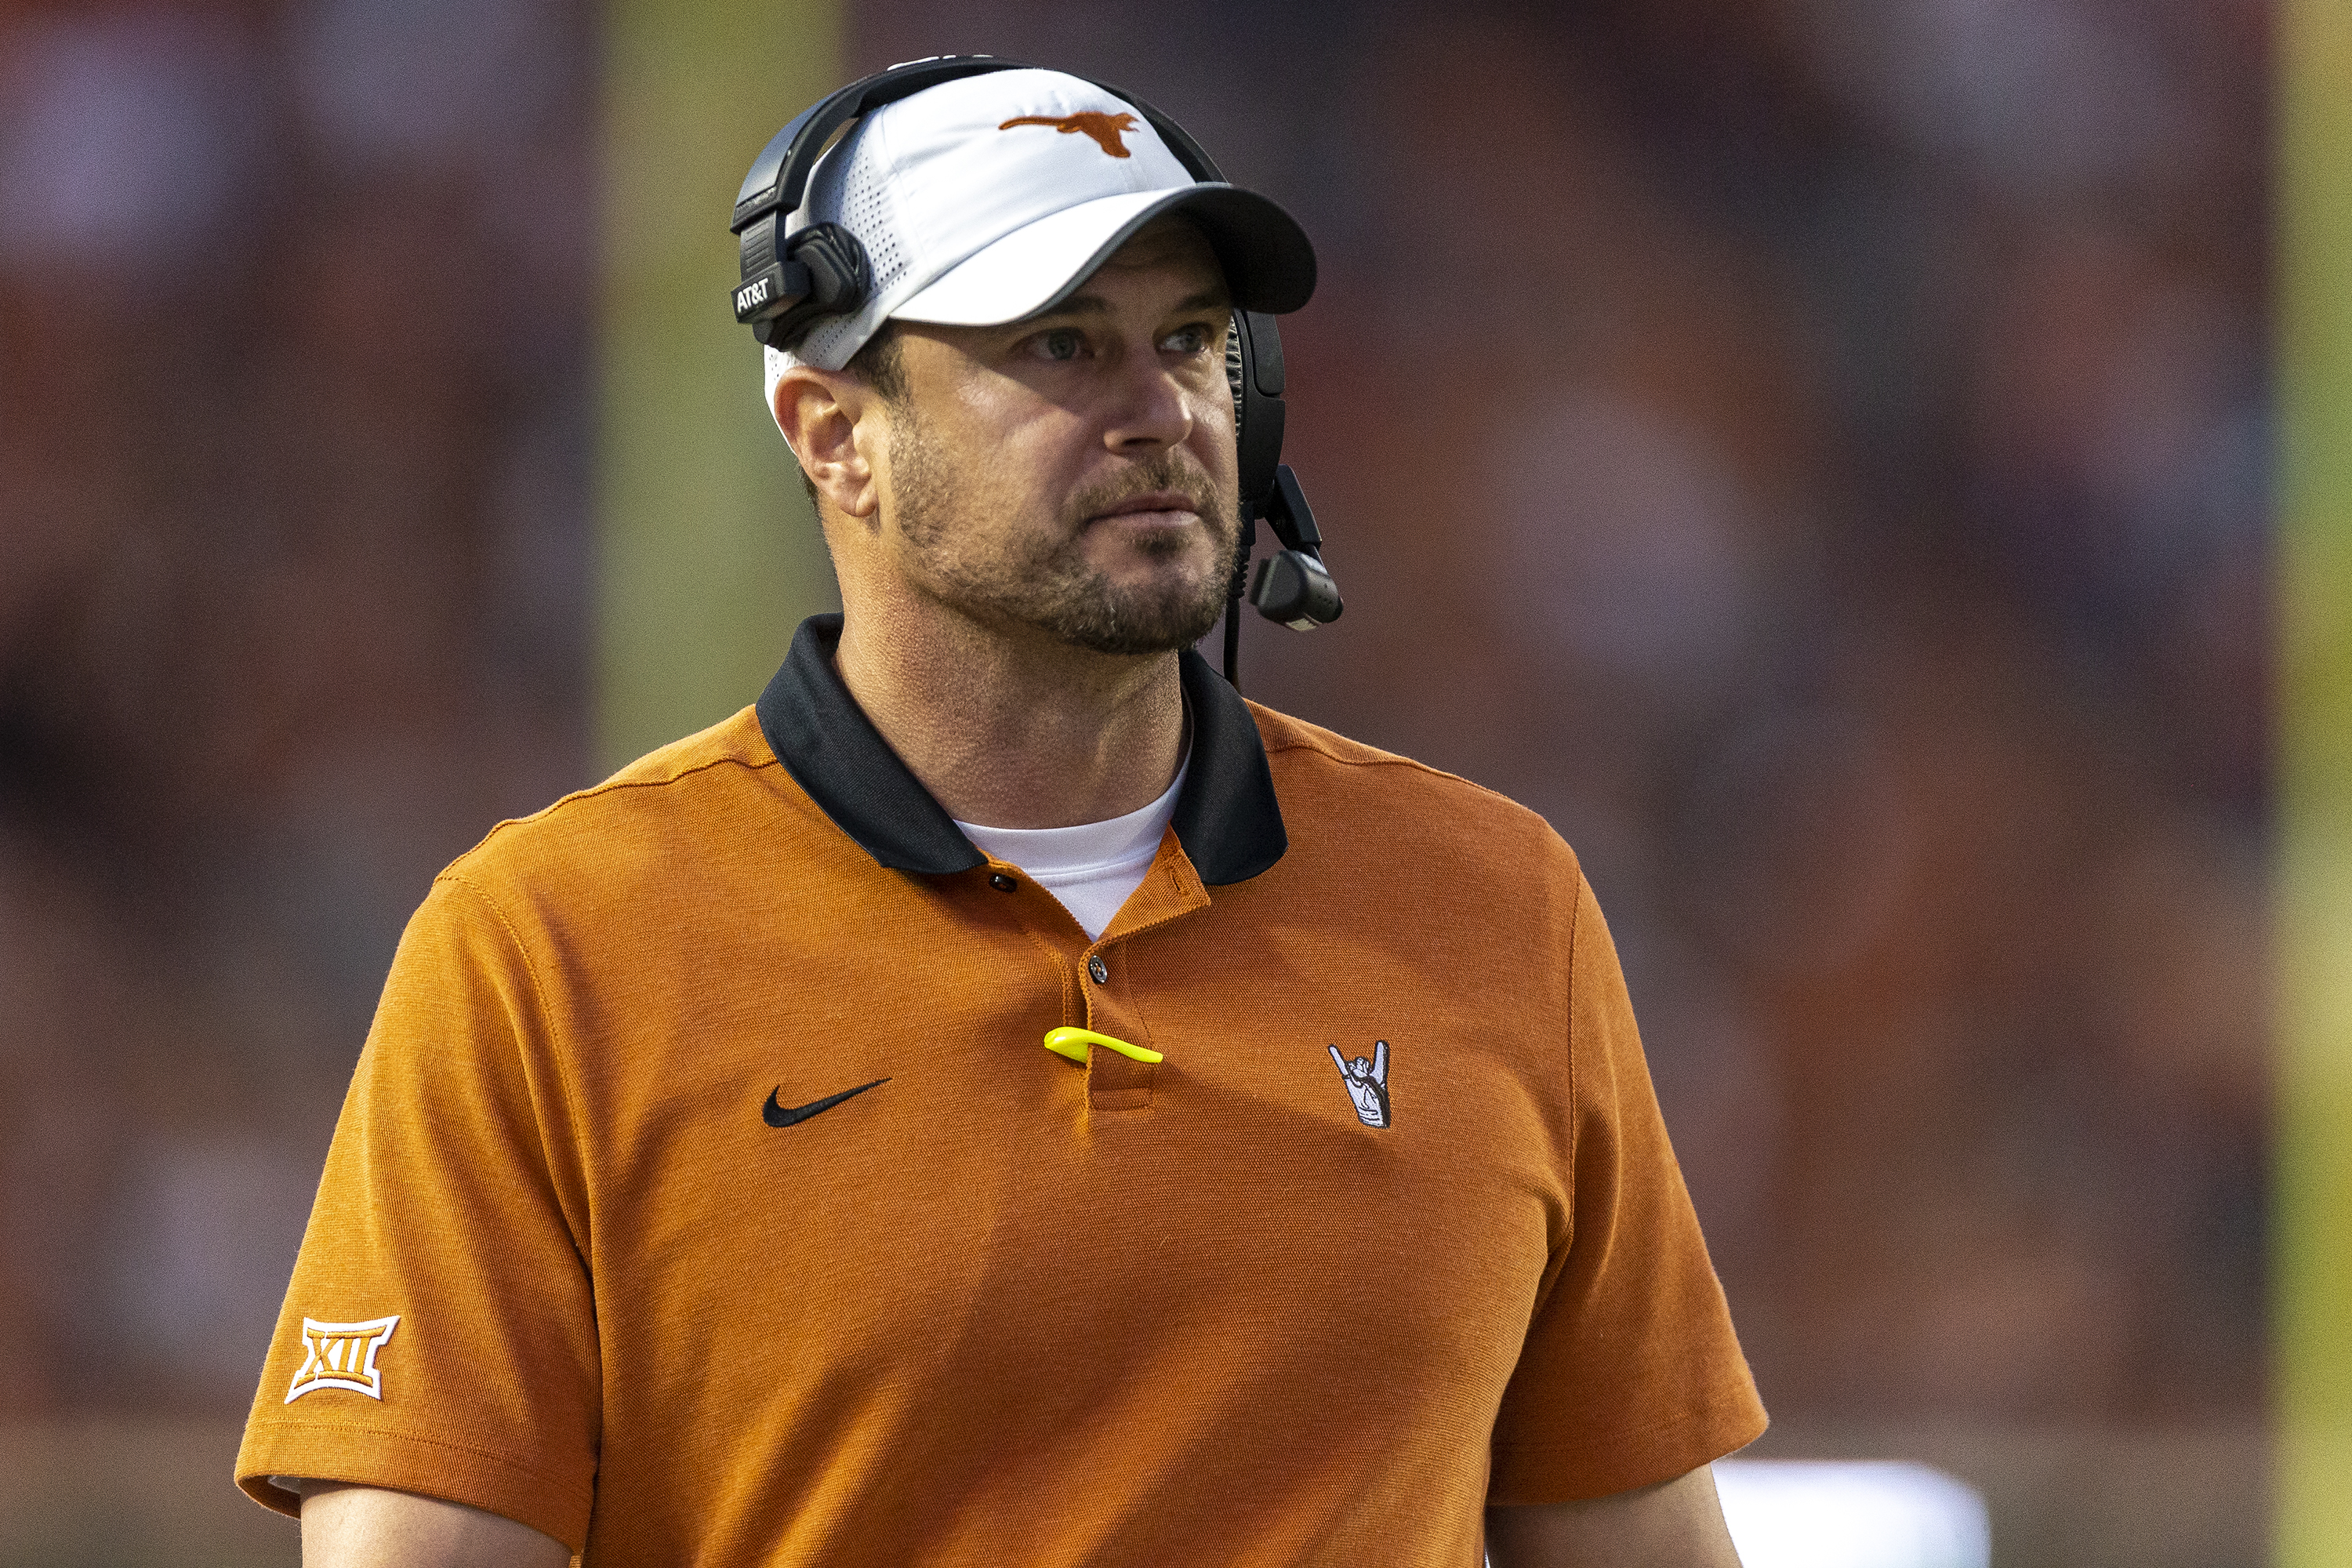 LISTEN: Tom Herman and the Longhorns speak to the media after defeating Utah in the Alamo Bowl